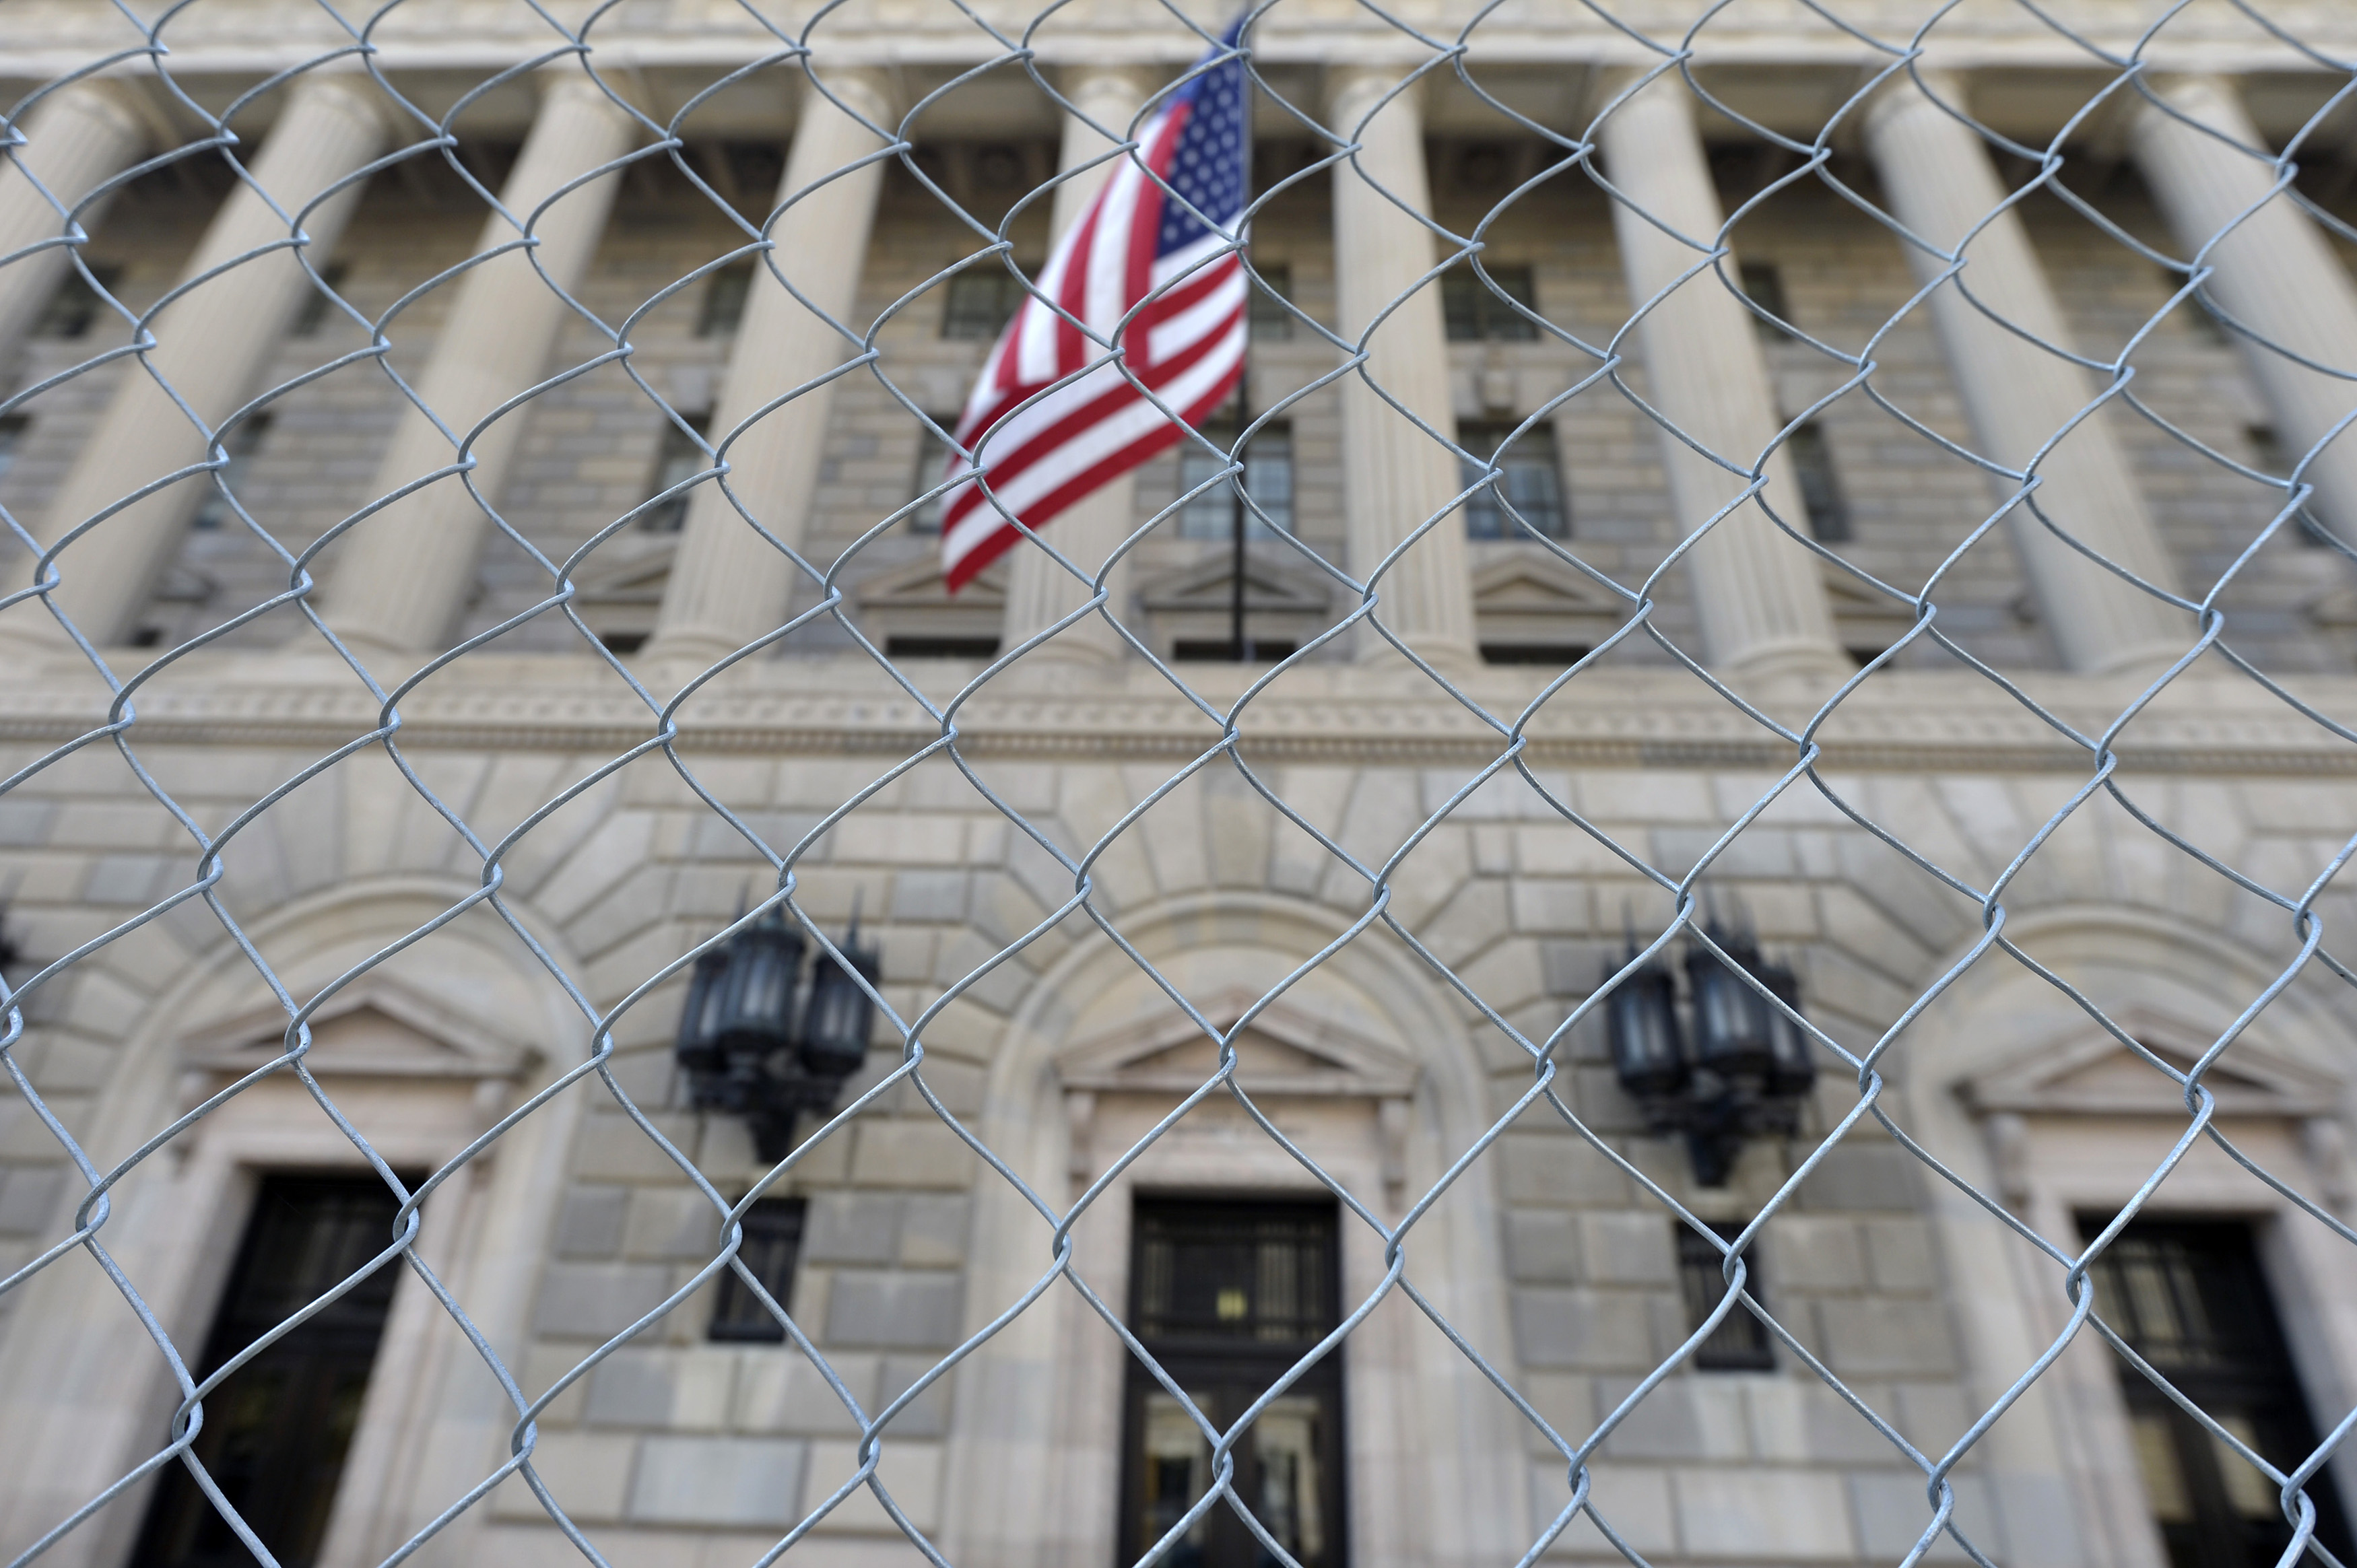 A fence surrounds the U.S. Department of Commerce in Washington